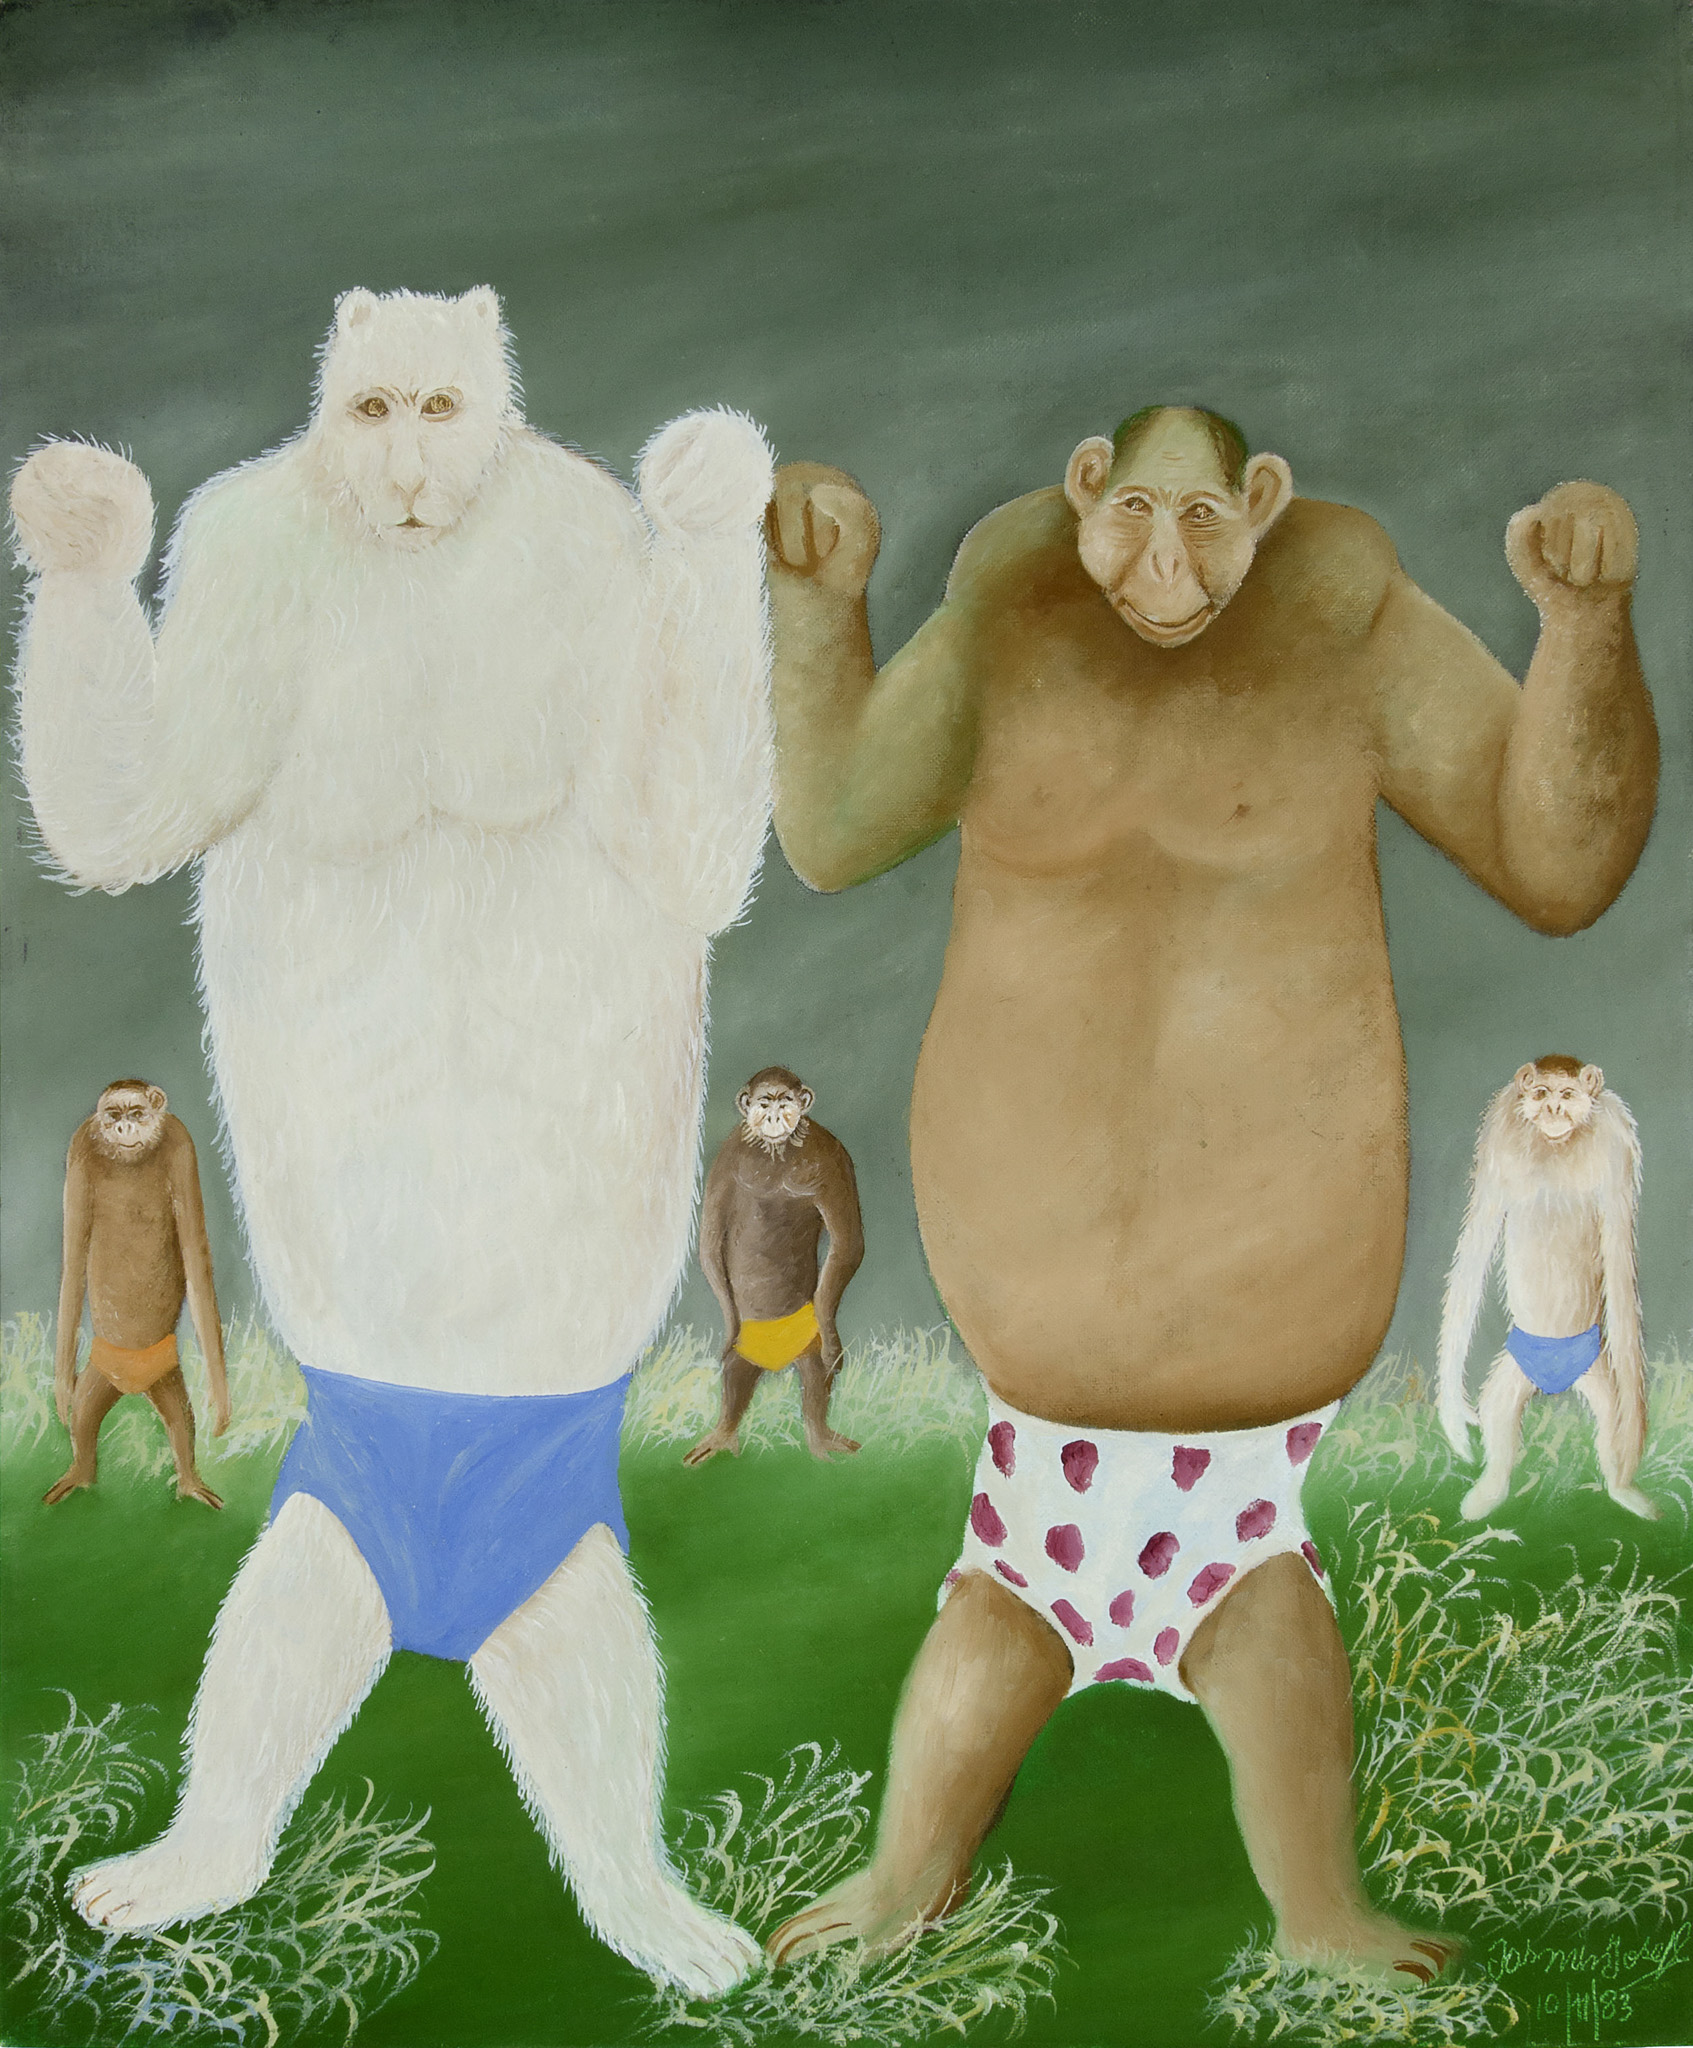 Untitled (Animals in Underpants), 1983